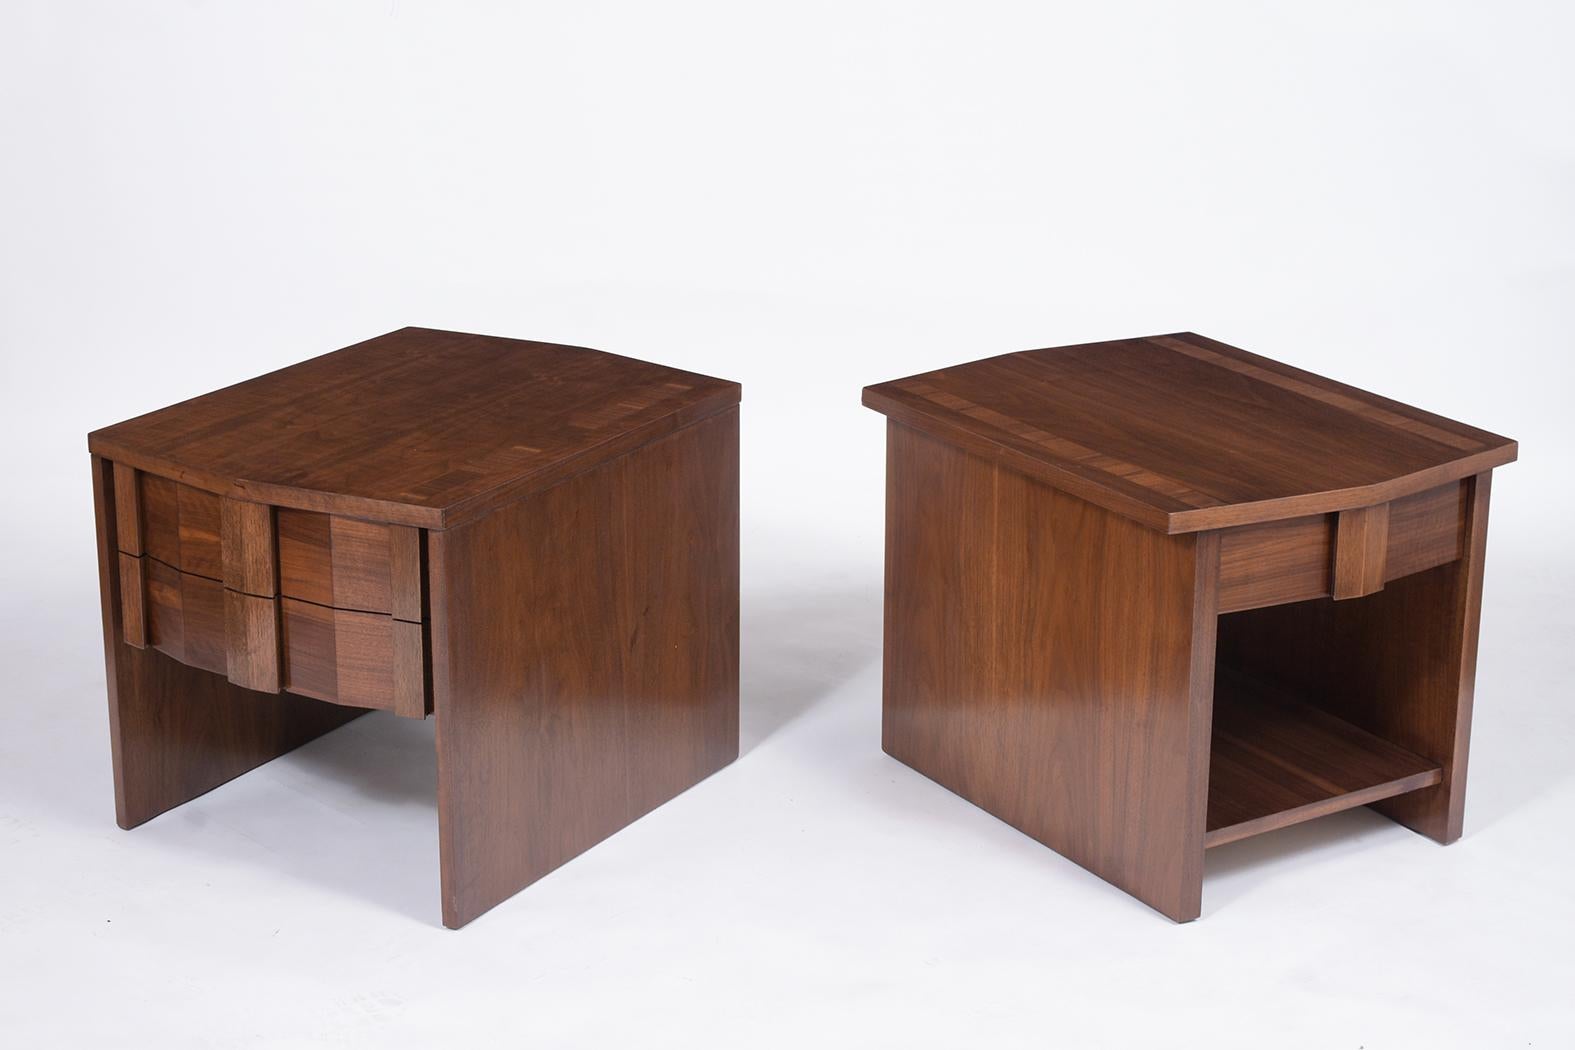 A sleek pair of midcentury nightstands that are professionally restored are made out of walnut wood and are newly stained in a walnut color with a lacquered finish. They feature a flat top diamond design with a double and single door and open shelf